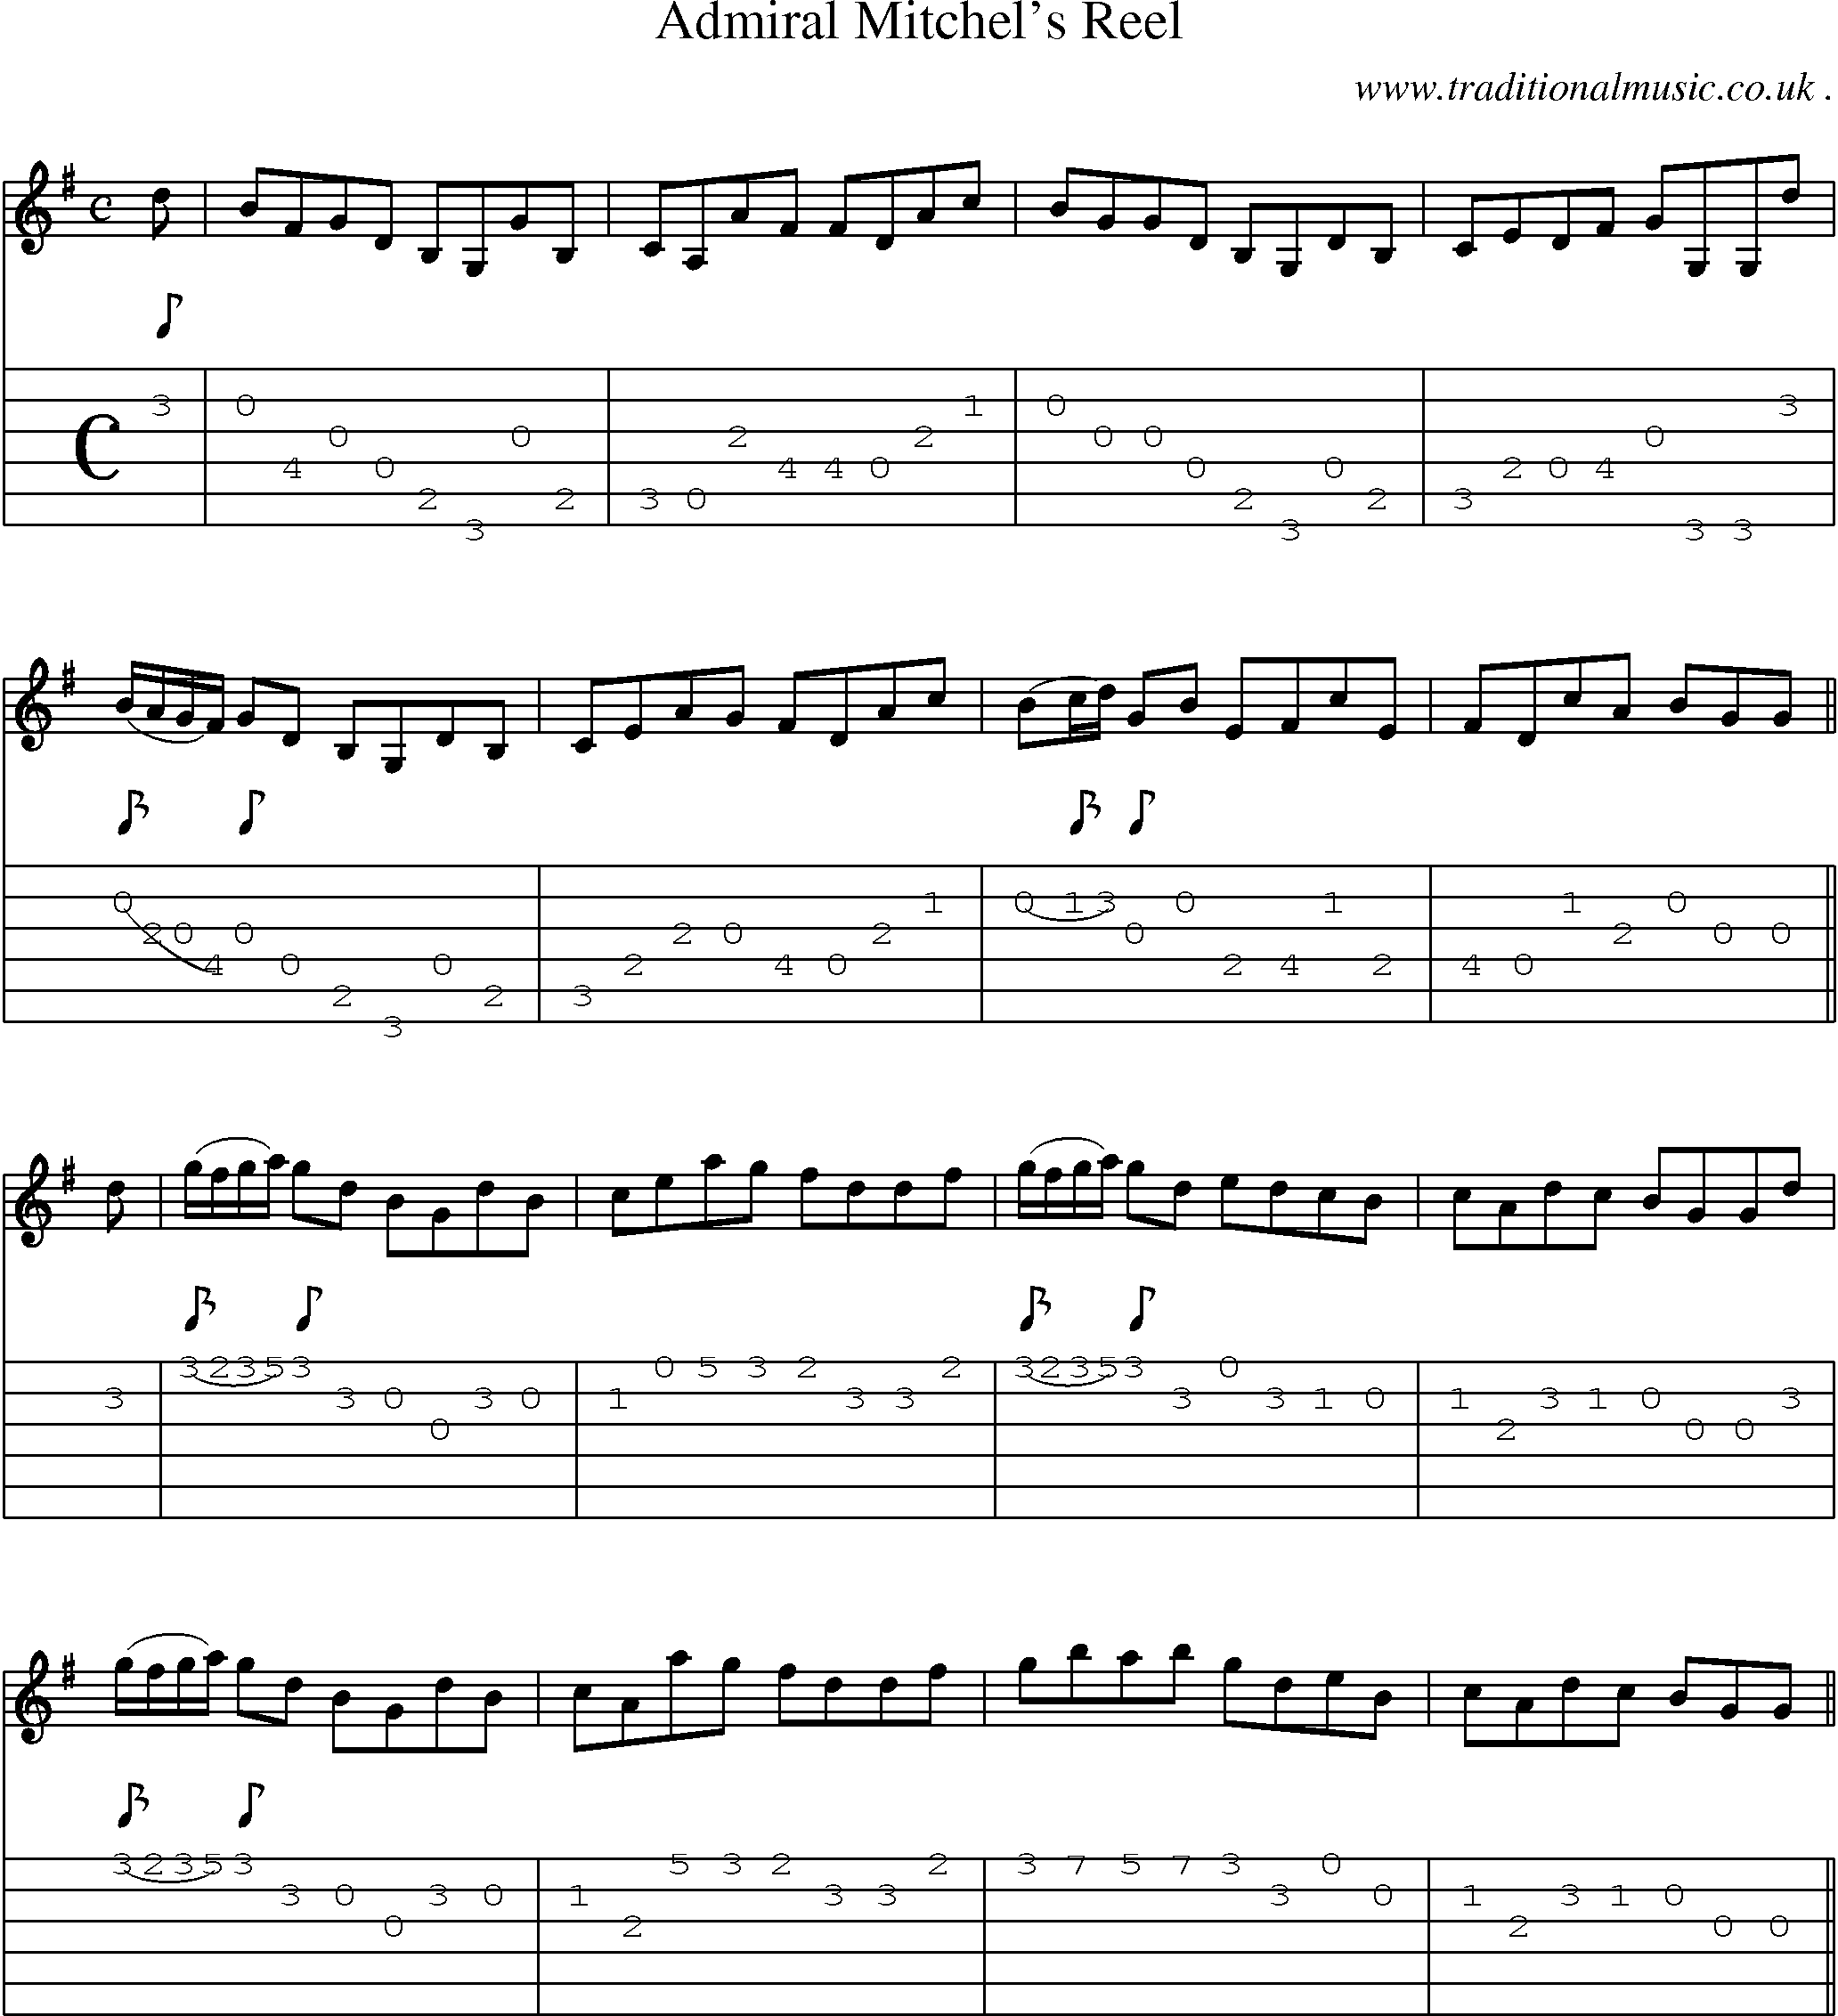 Sheet-Music and Guitar Tabs for Admiral Mitchels Reel